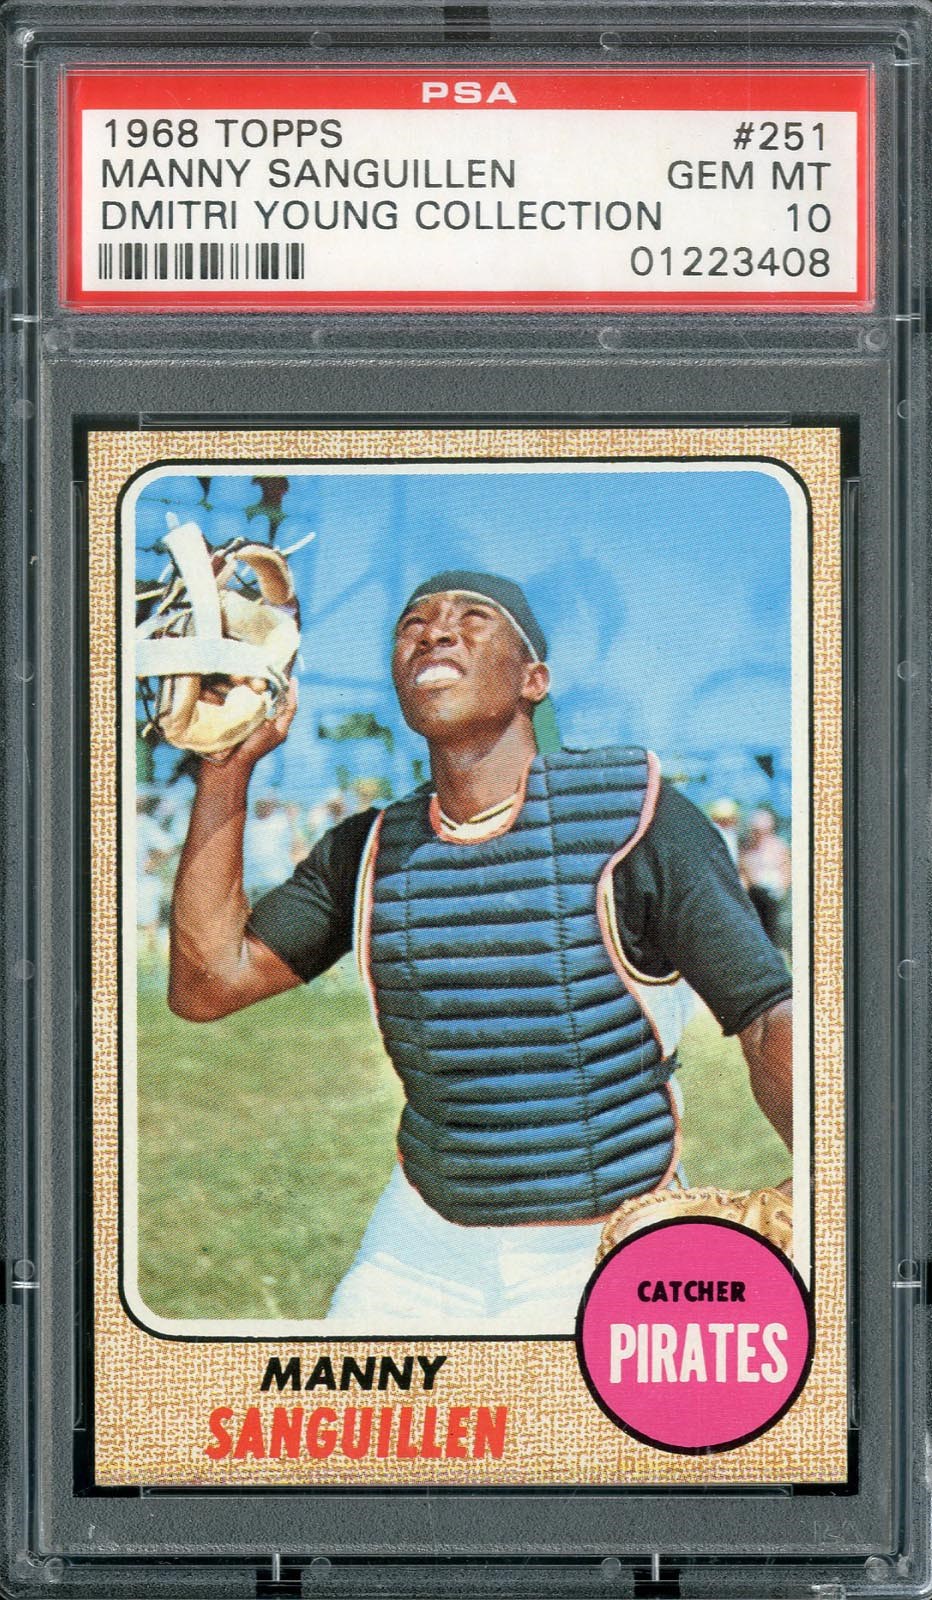 Baseball and Trading Cards - 1968 Topps #251 Manny Sanguillen PSA GEM MINT 10 (Dmitri Young Collection)